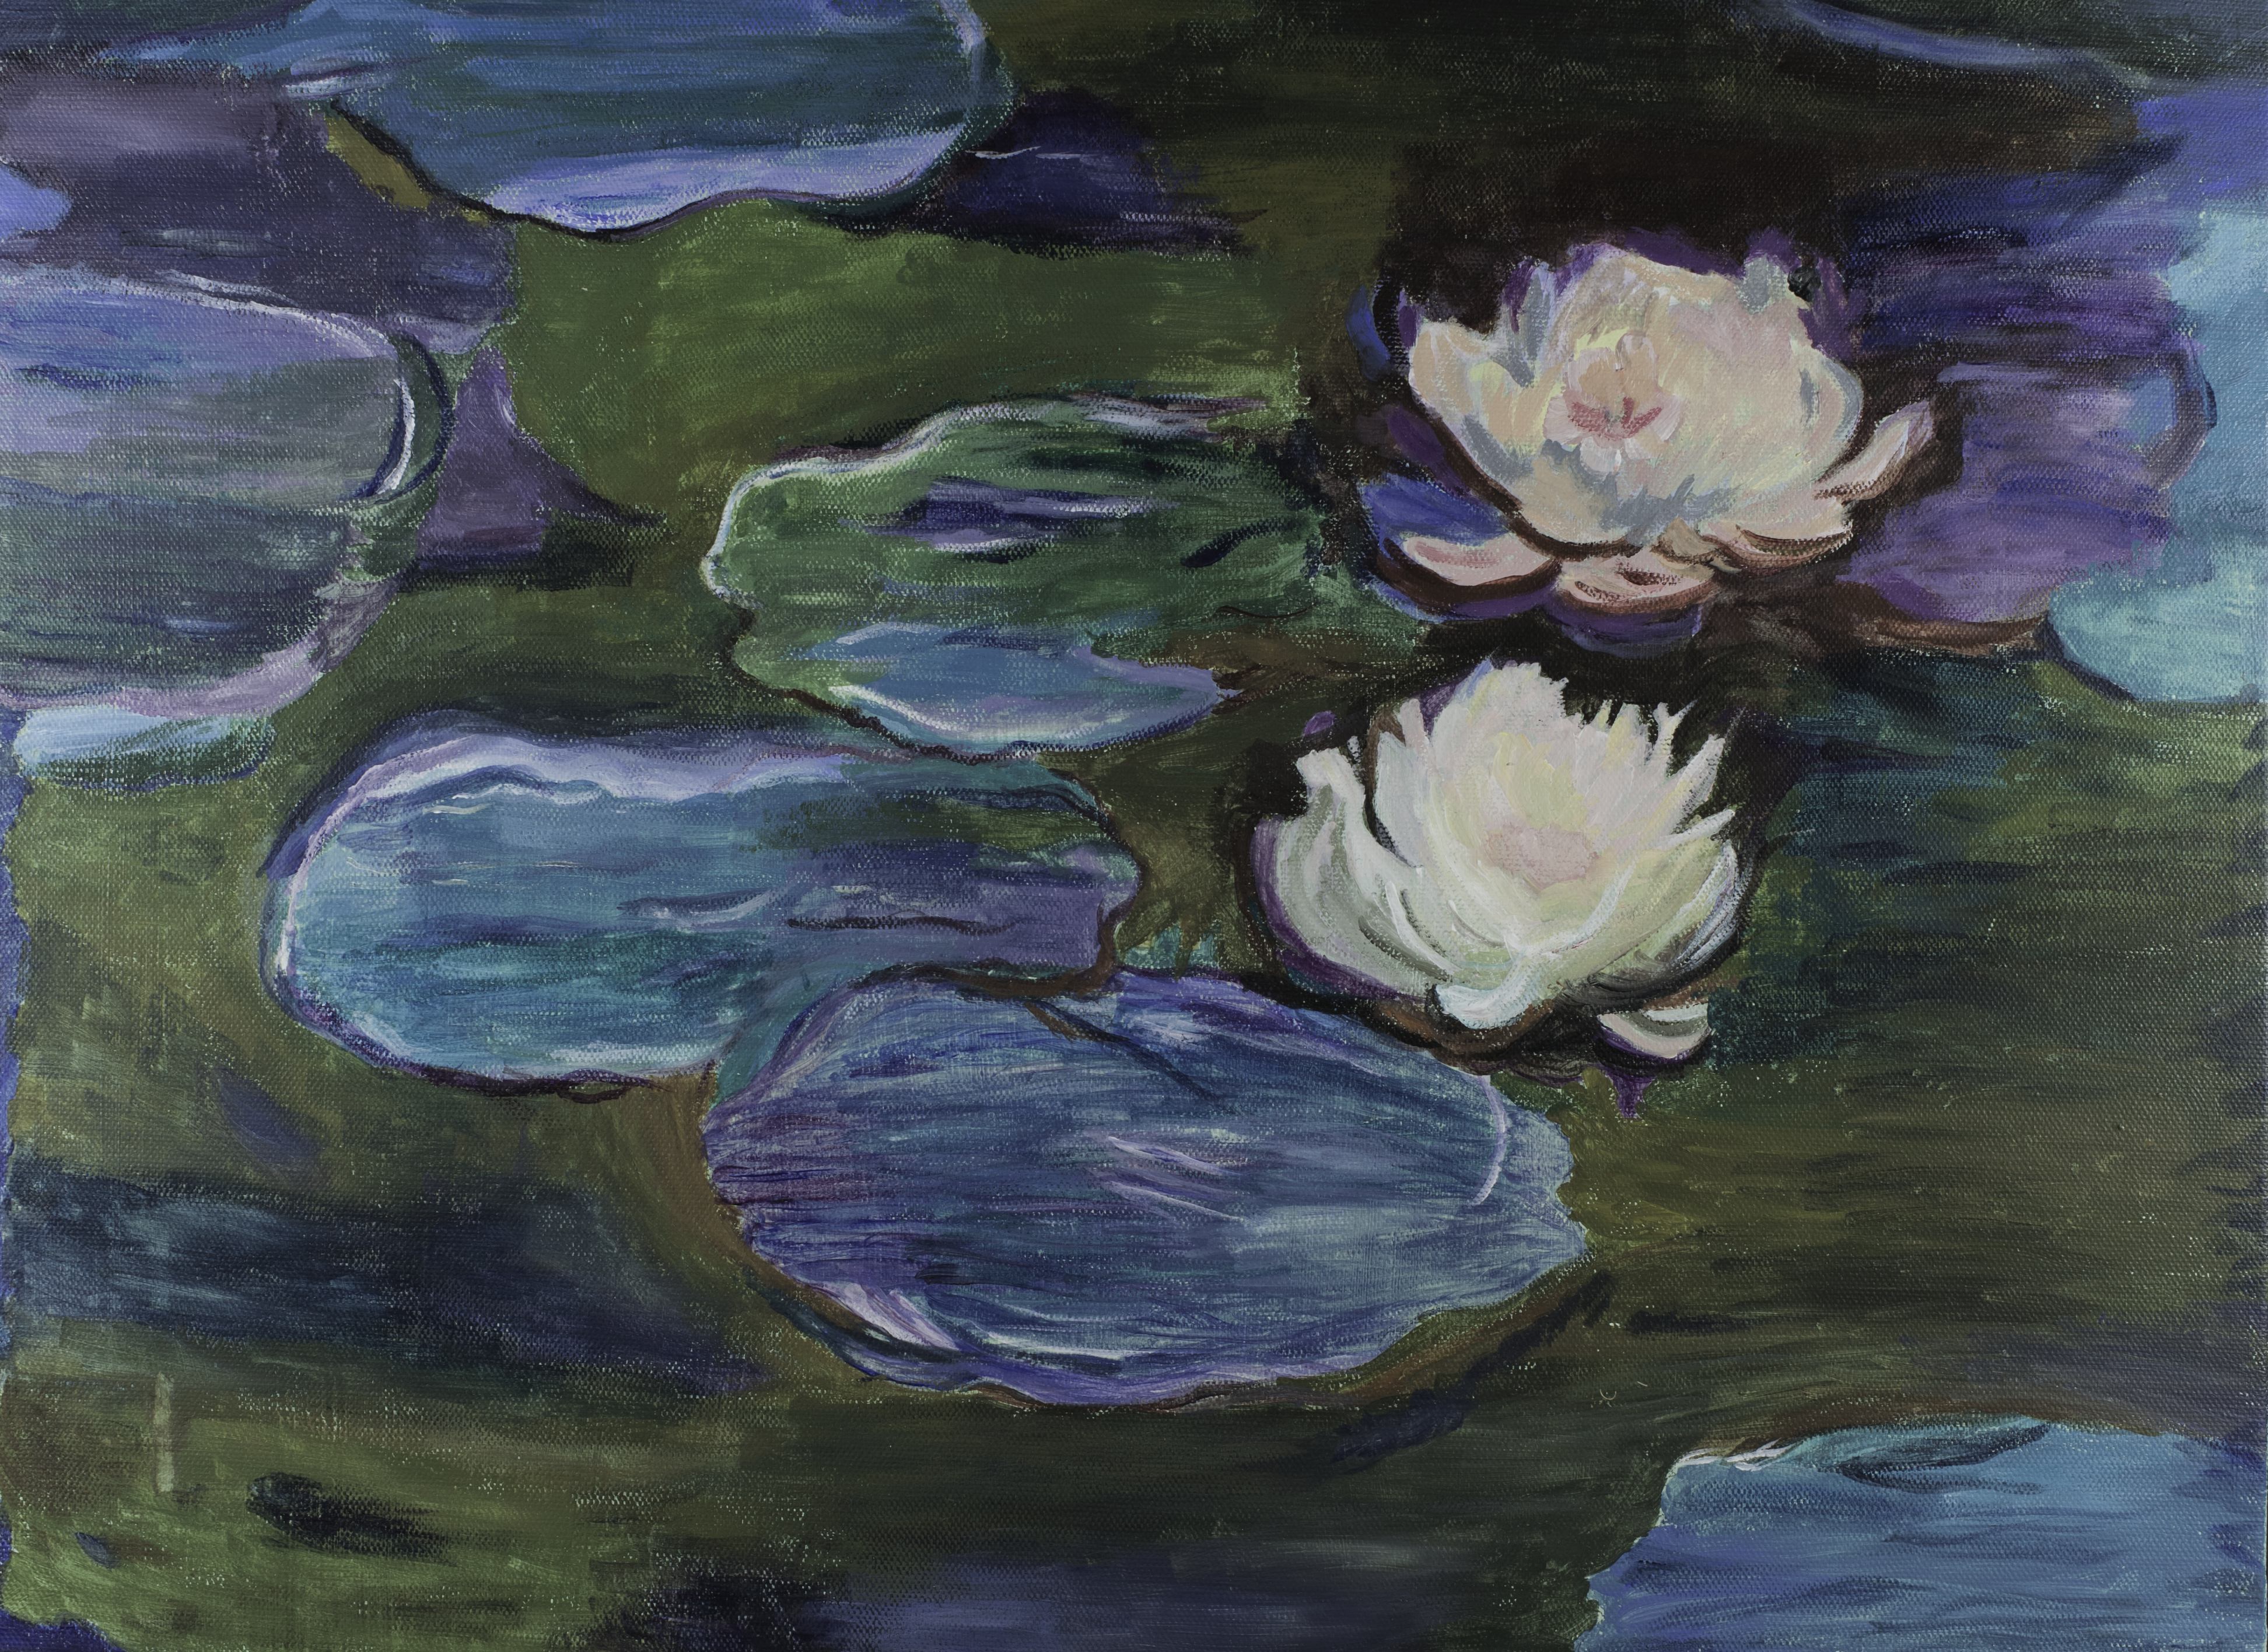 artist's painting of lily pads and water